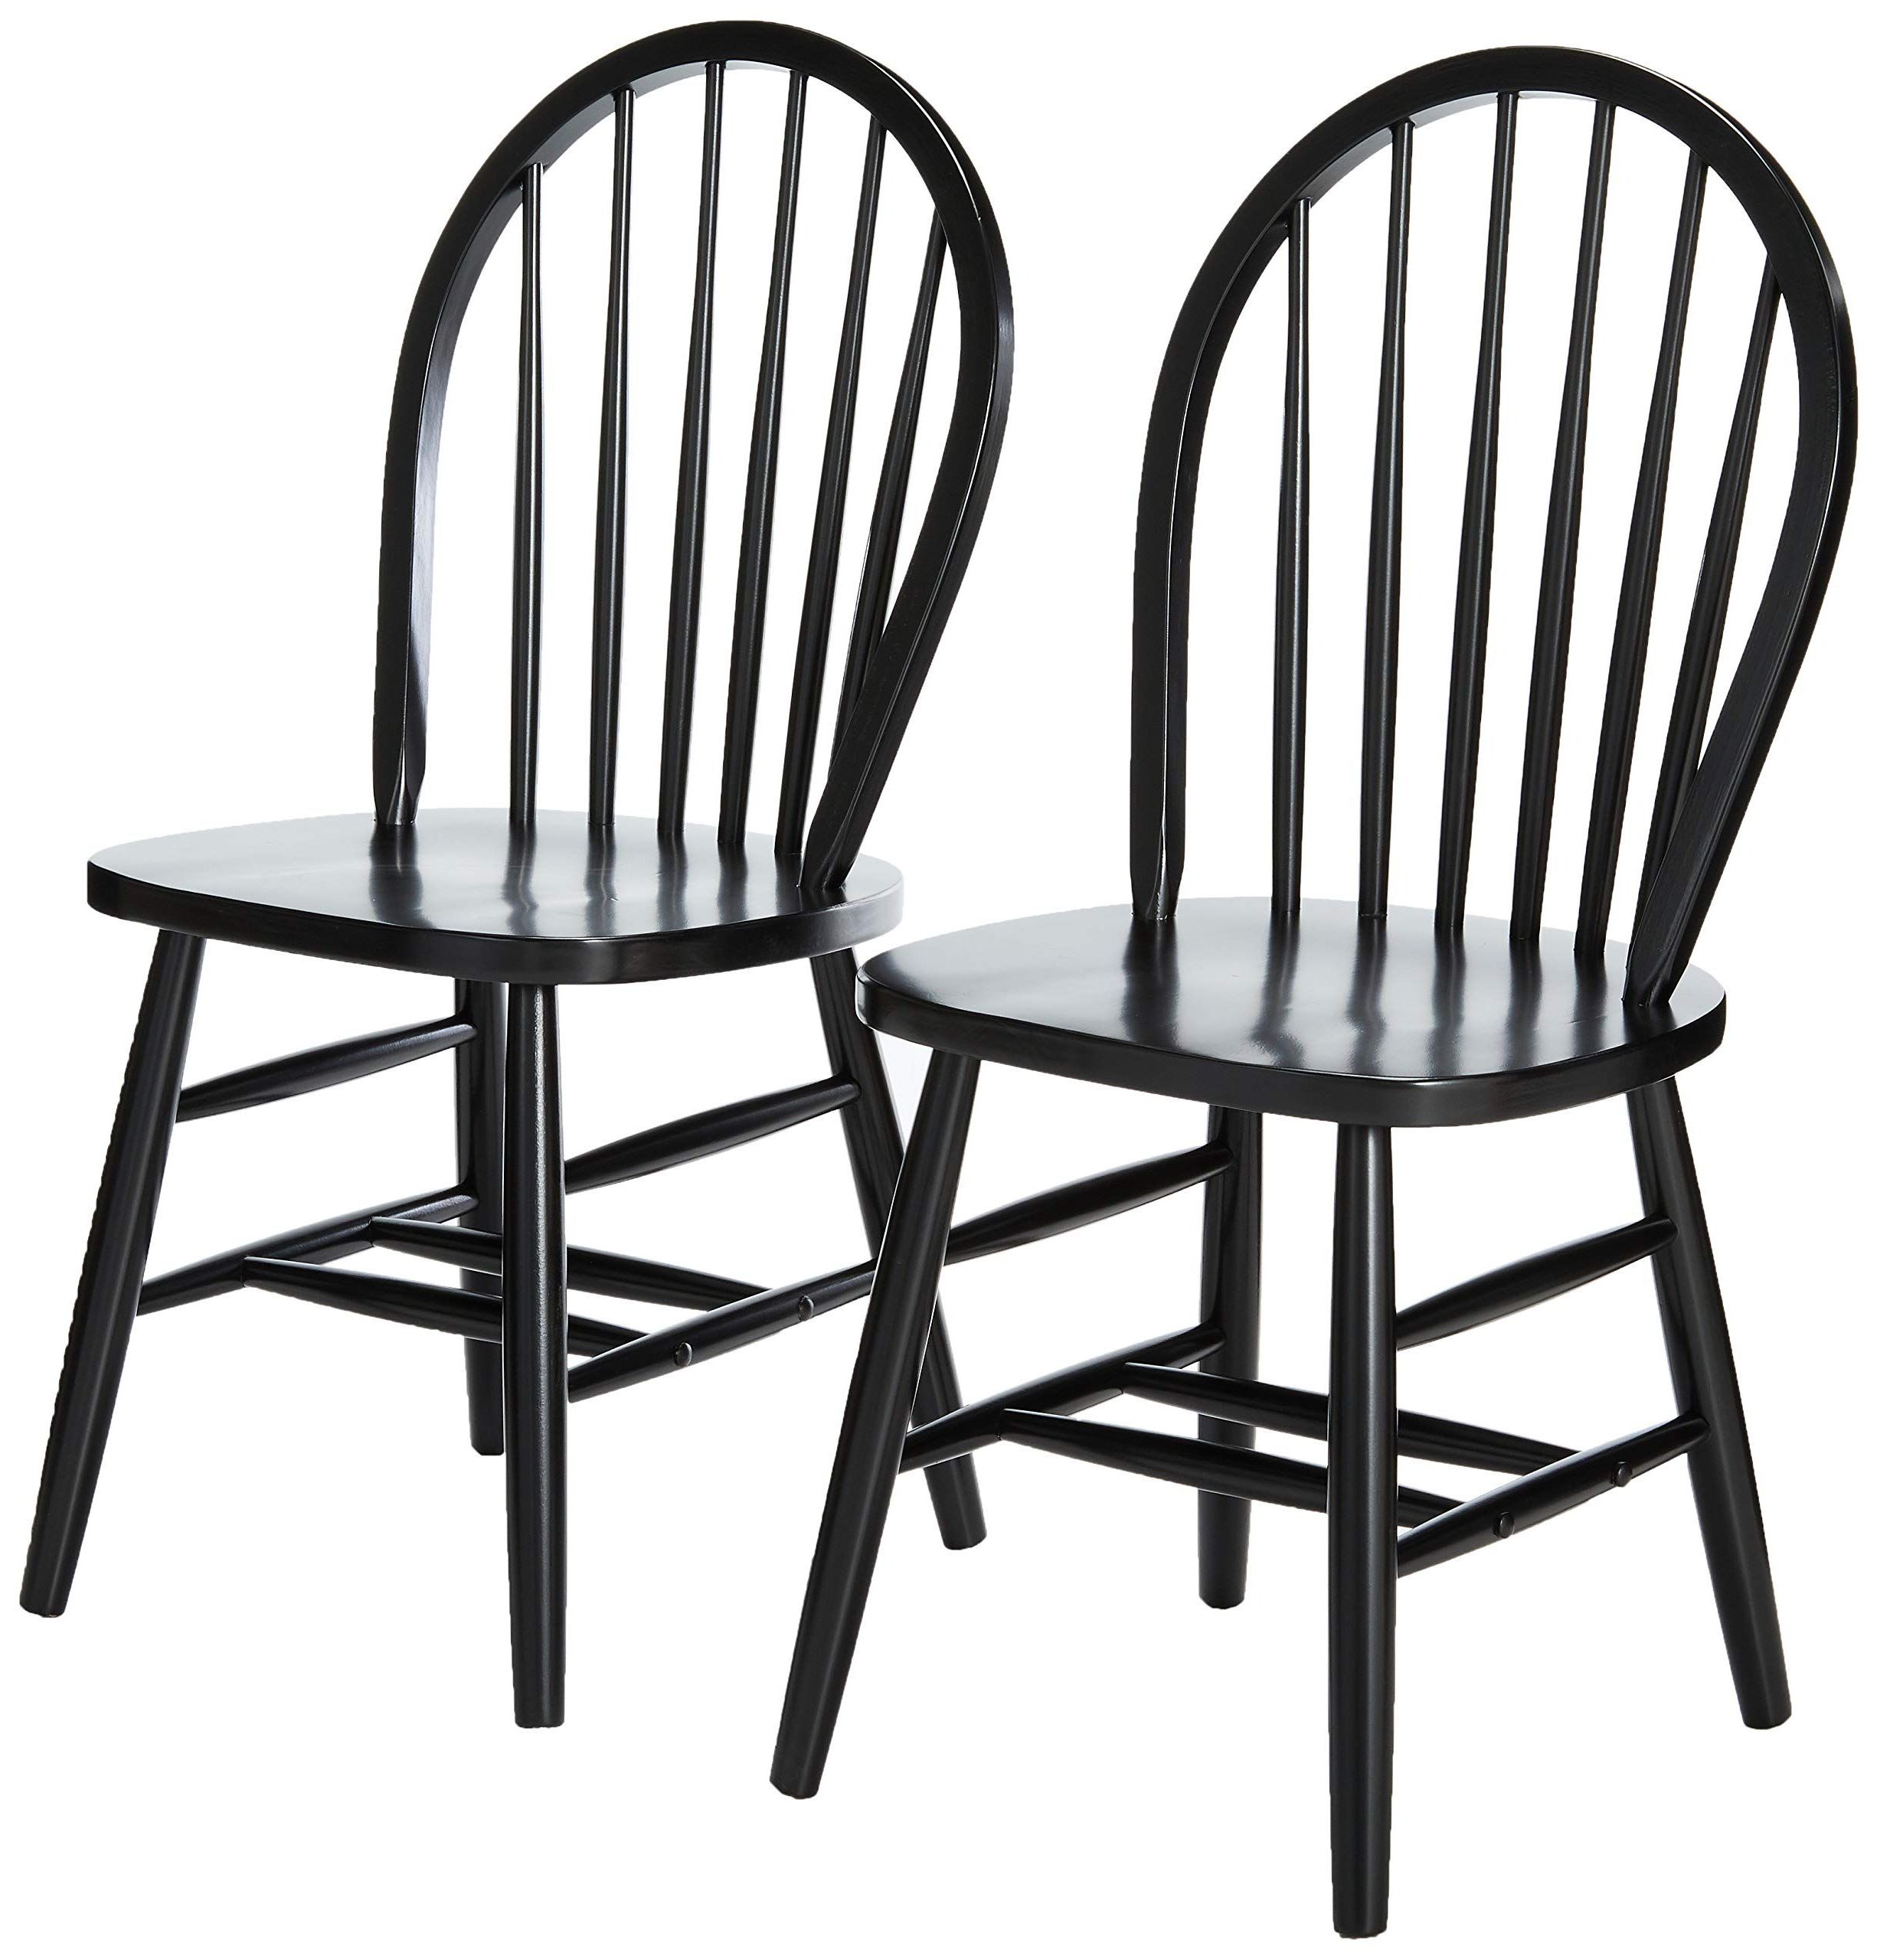 Winsome Windsor 2 Pc Set Rta Black Chair (View 11 of 15)